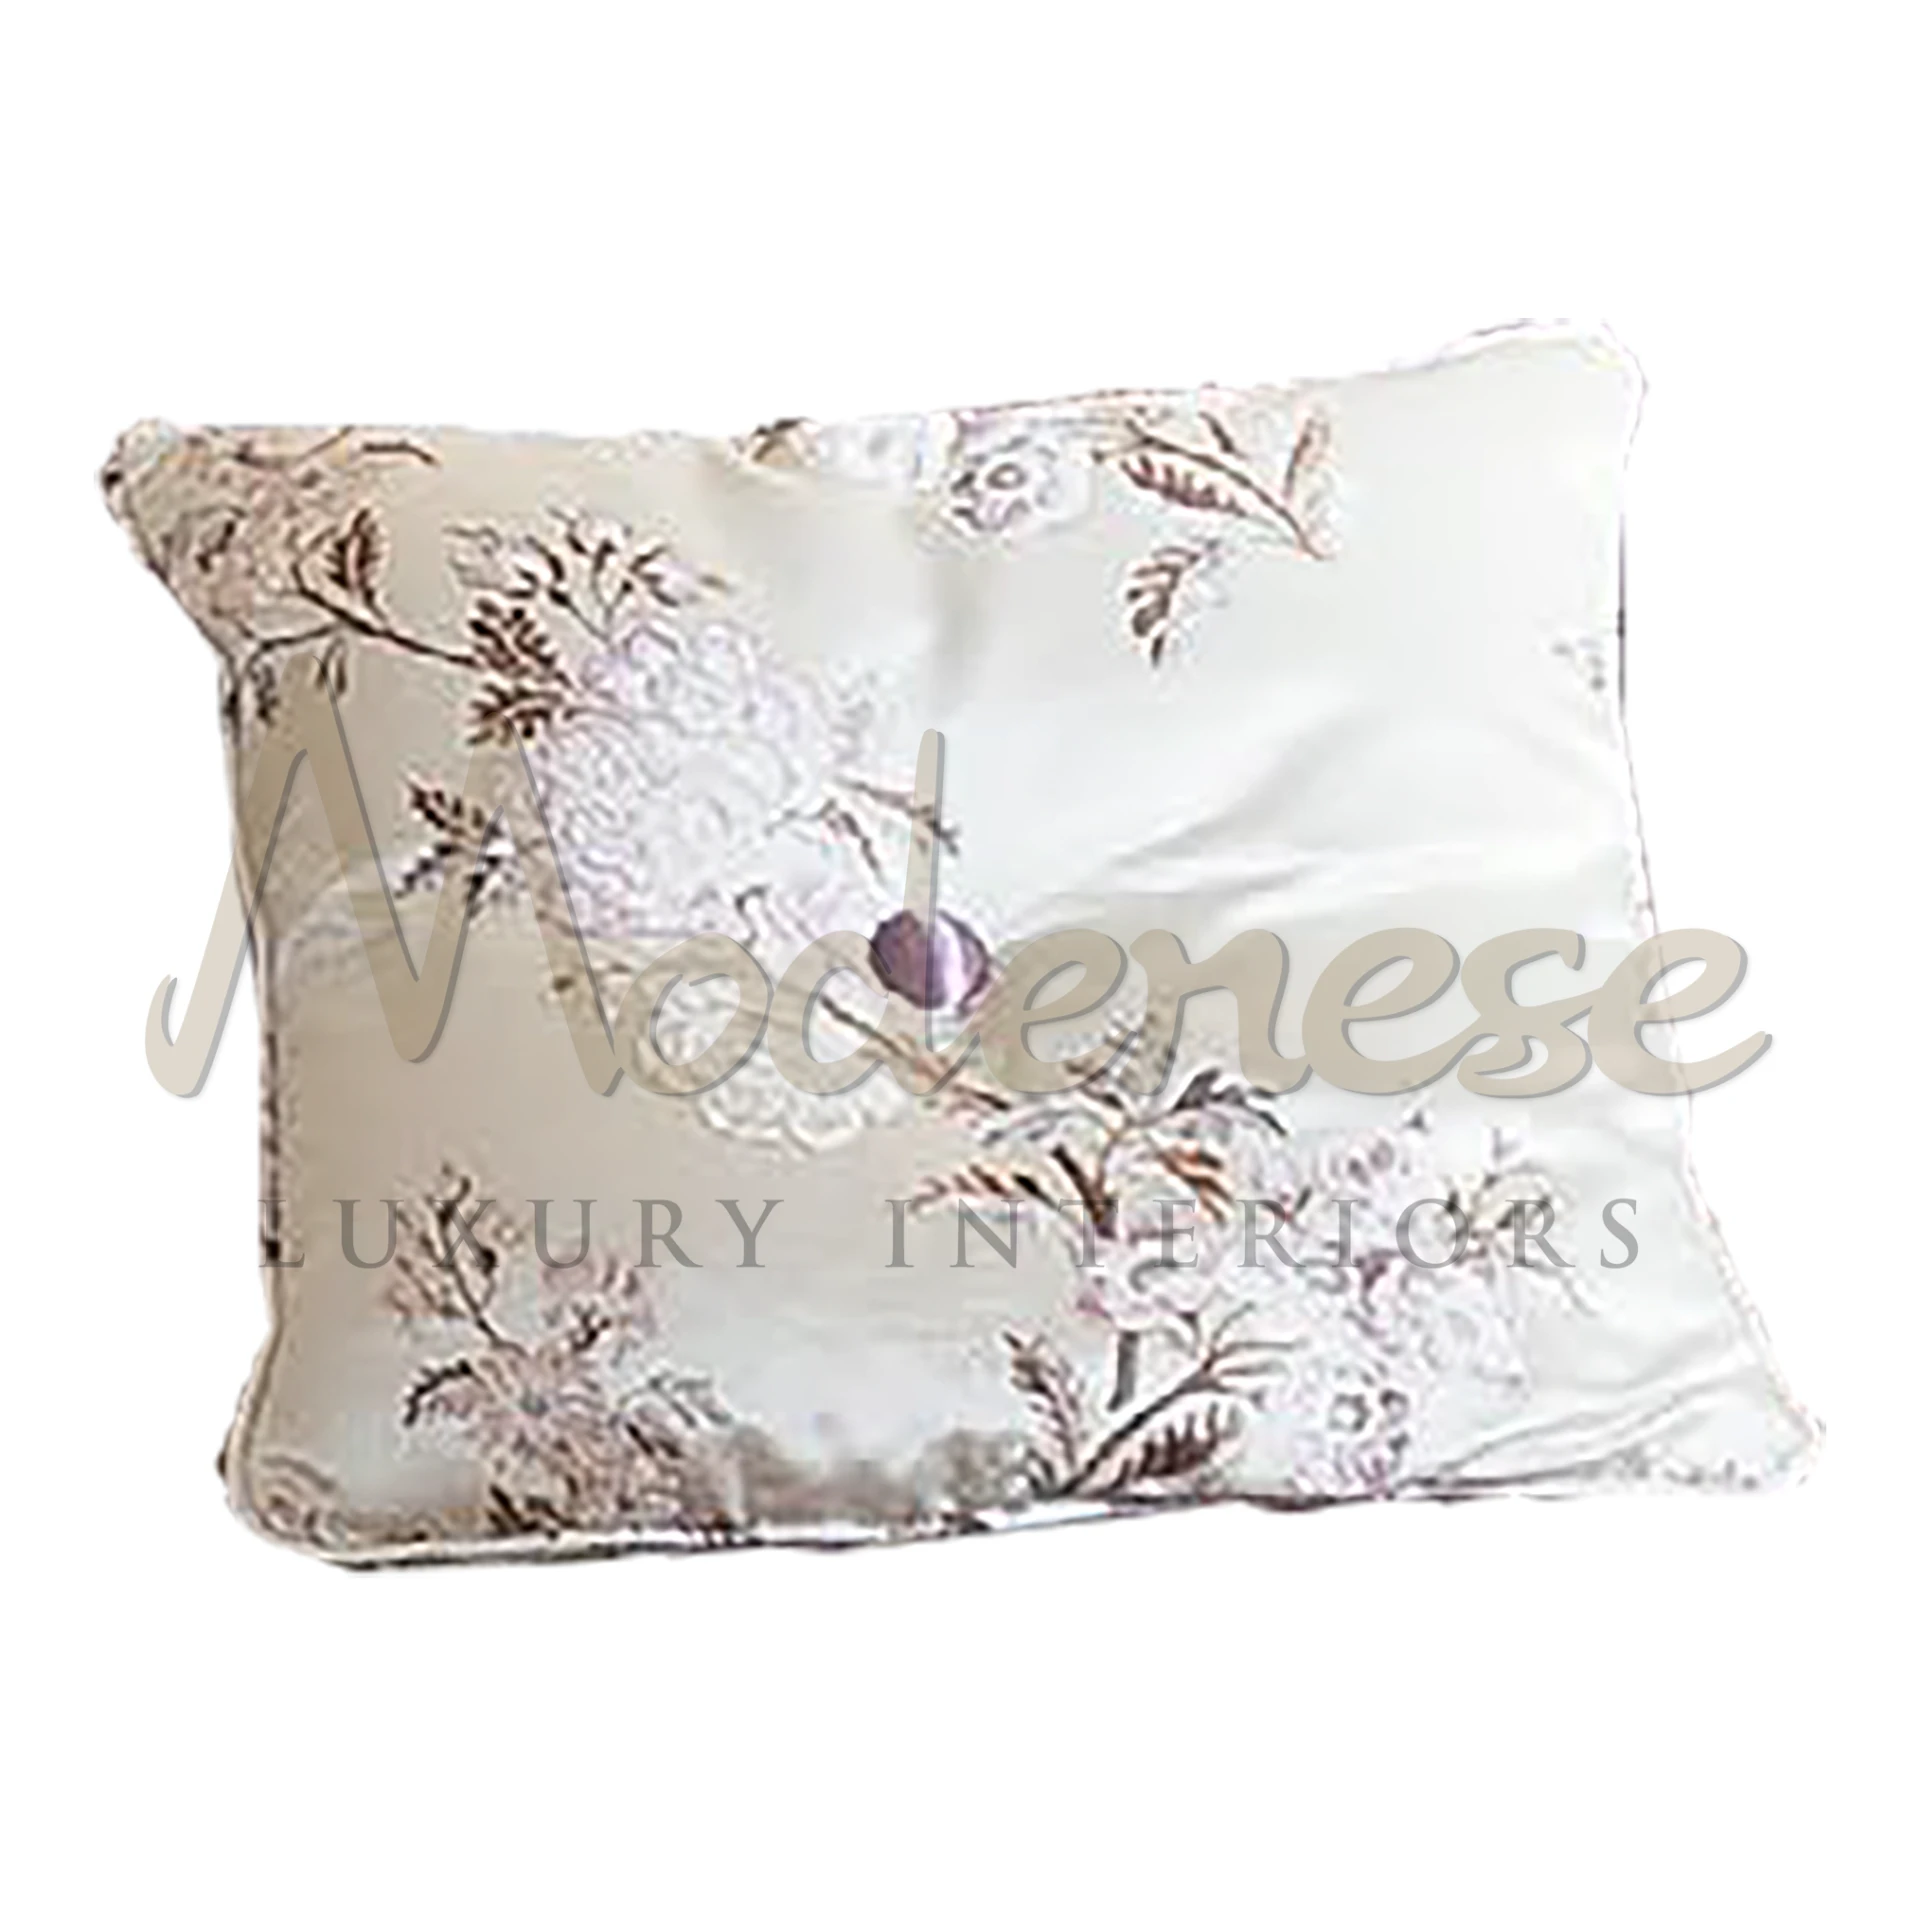 Victorian Flower Pillow by Modenese Interiors: Elegant accessory with intricate floral patterns and delicate embroidery.